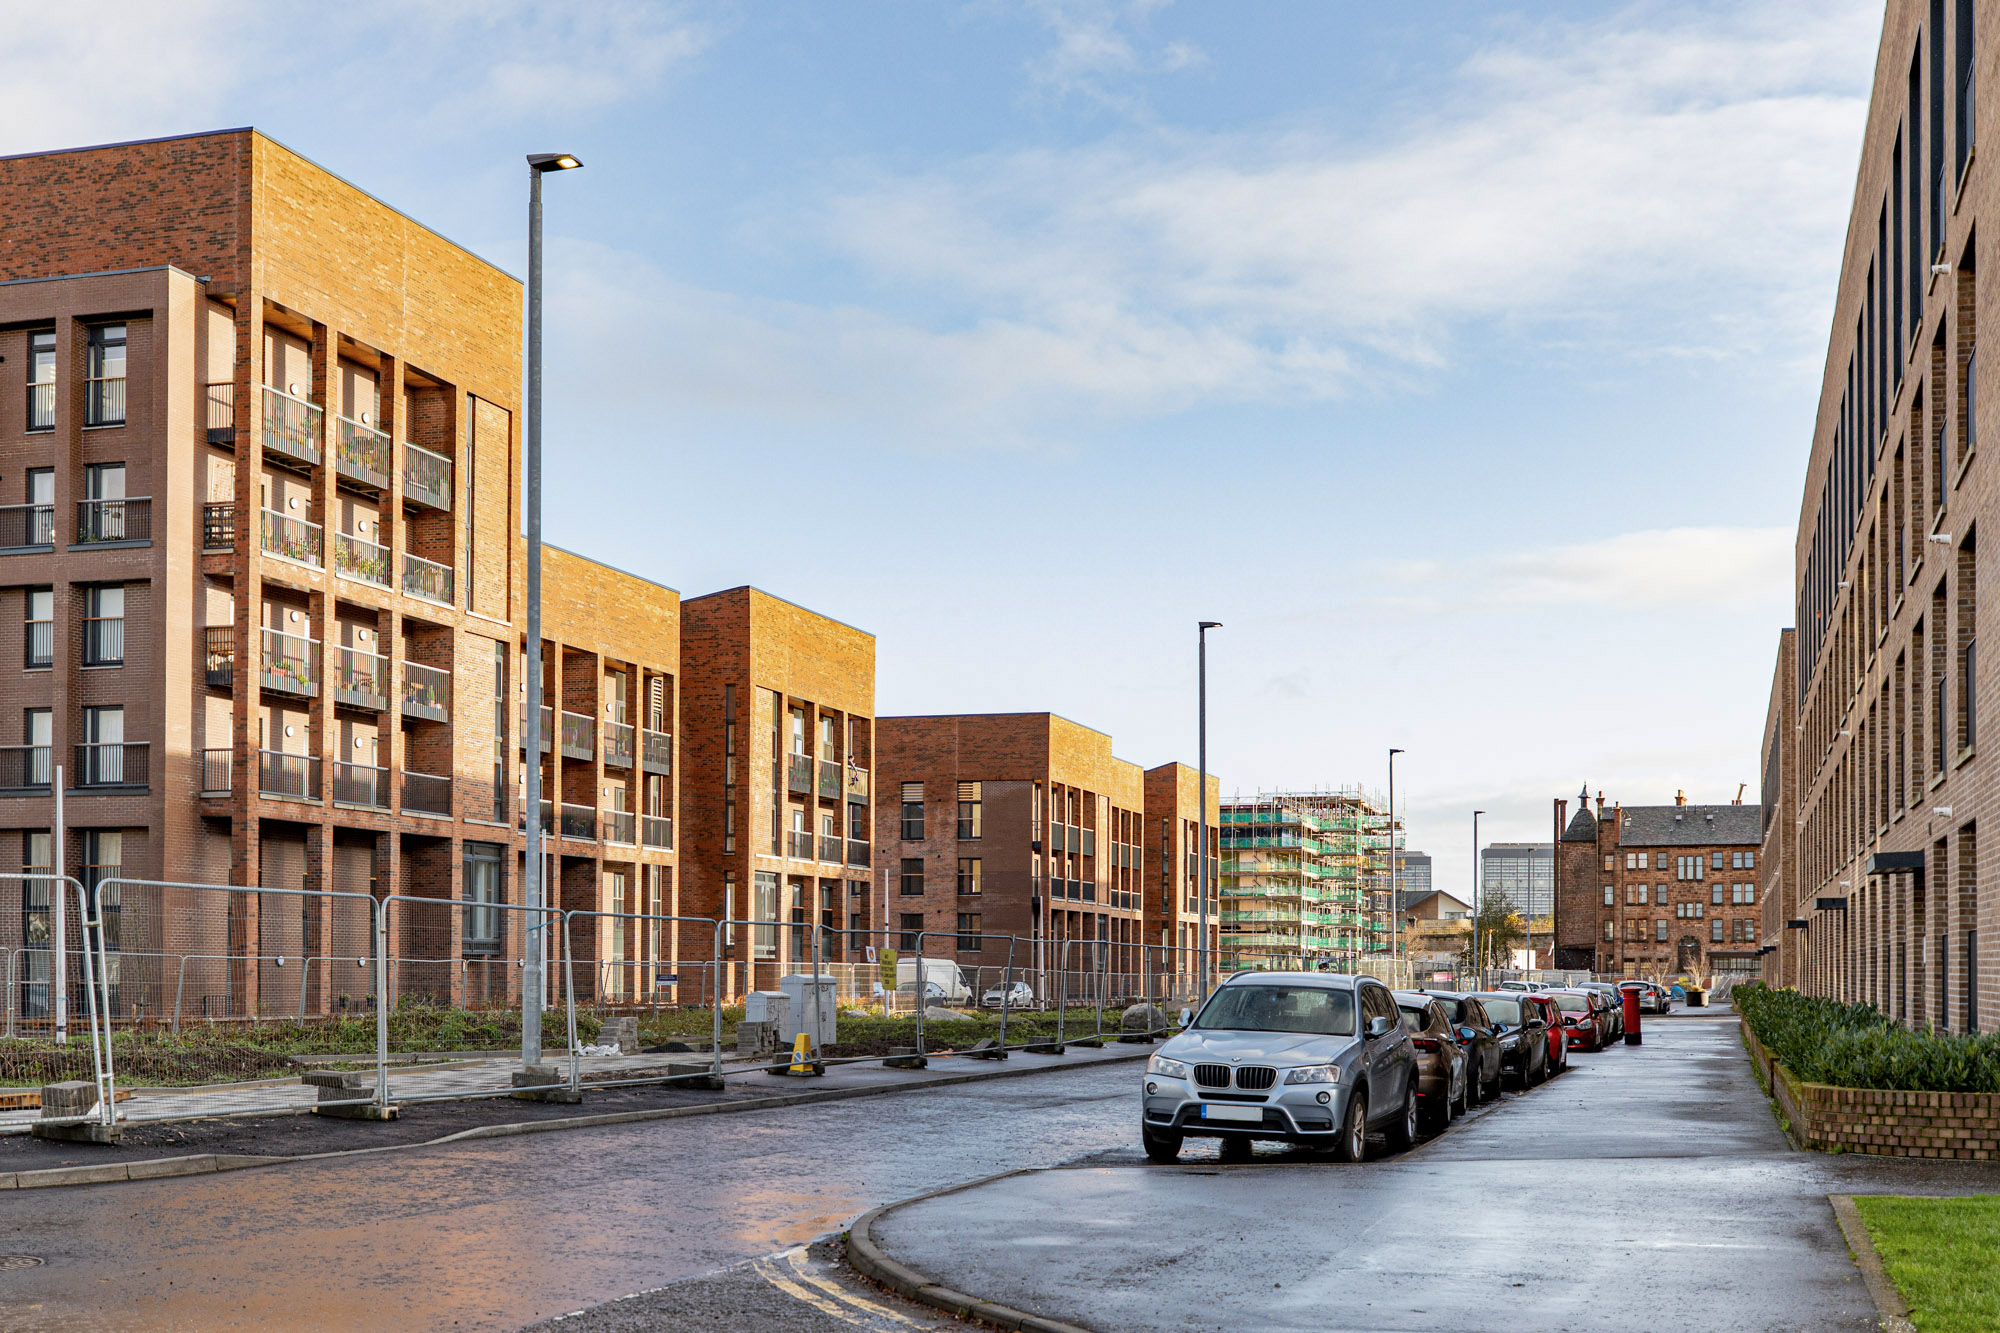 new affordable apartments built within the Laurieston, Gorbals area of Glasgow